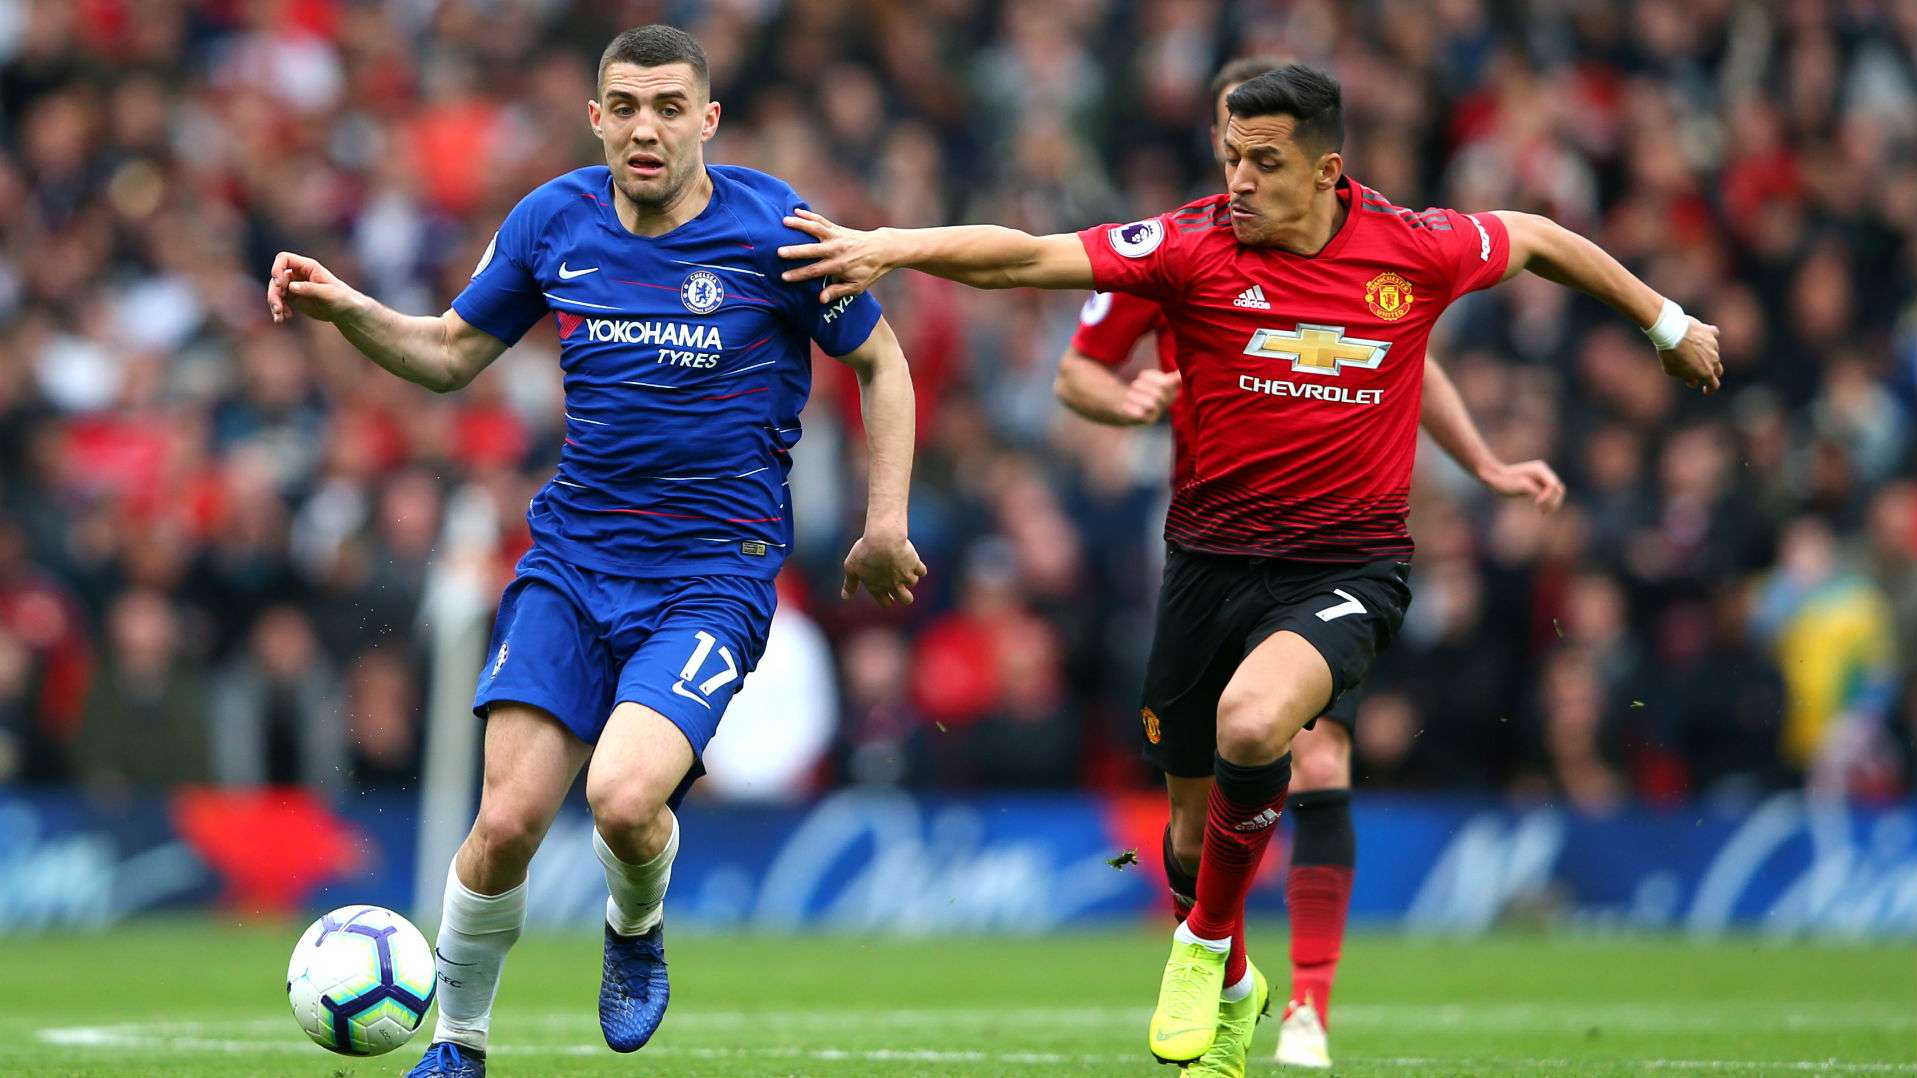 280419 ALEXIS Sánchez Marco Kovacic Manchester United Chelsea